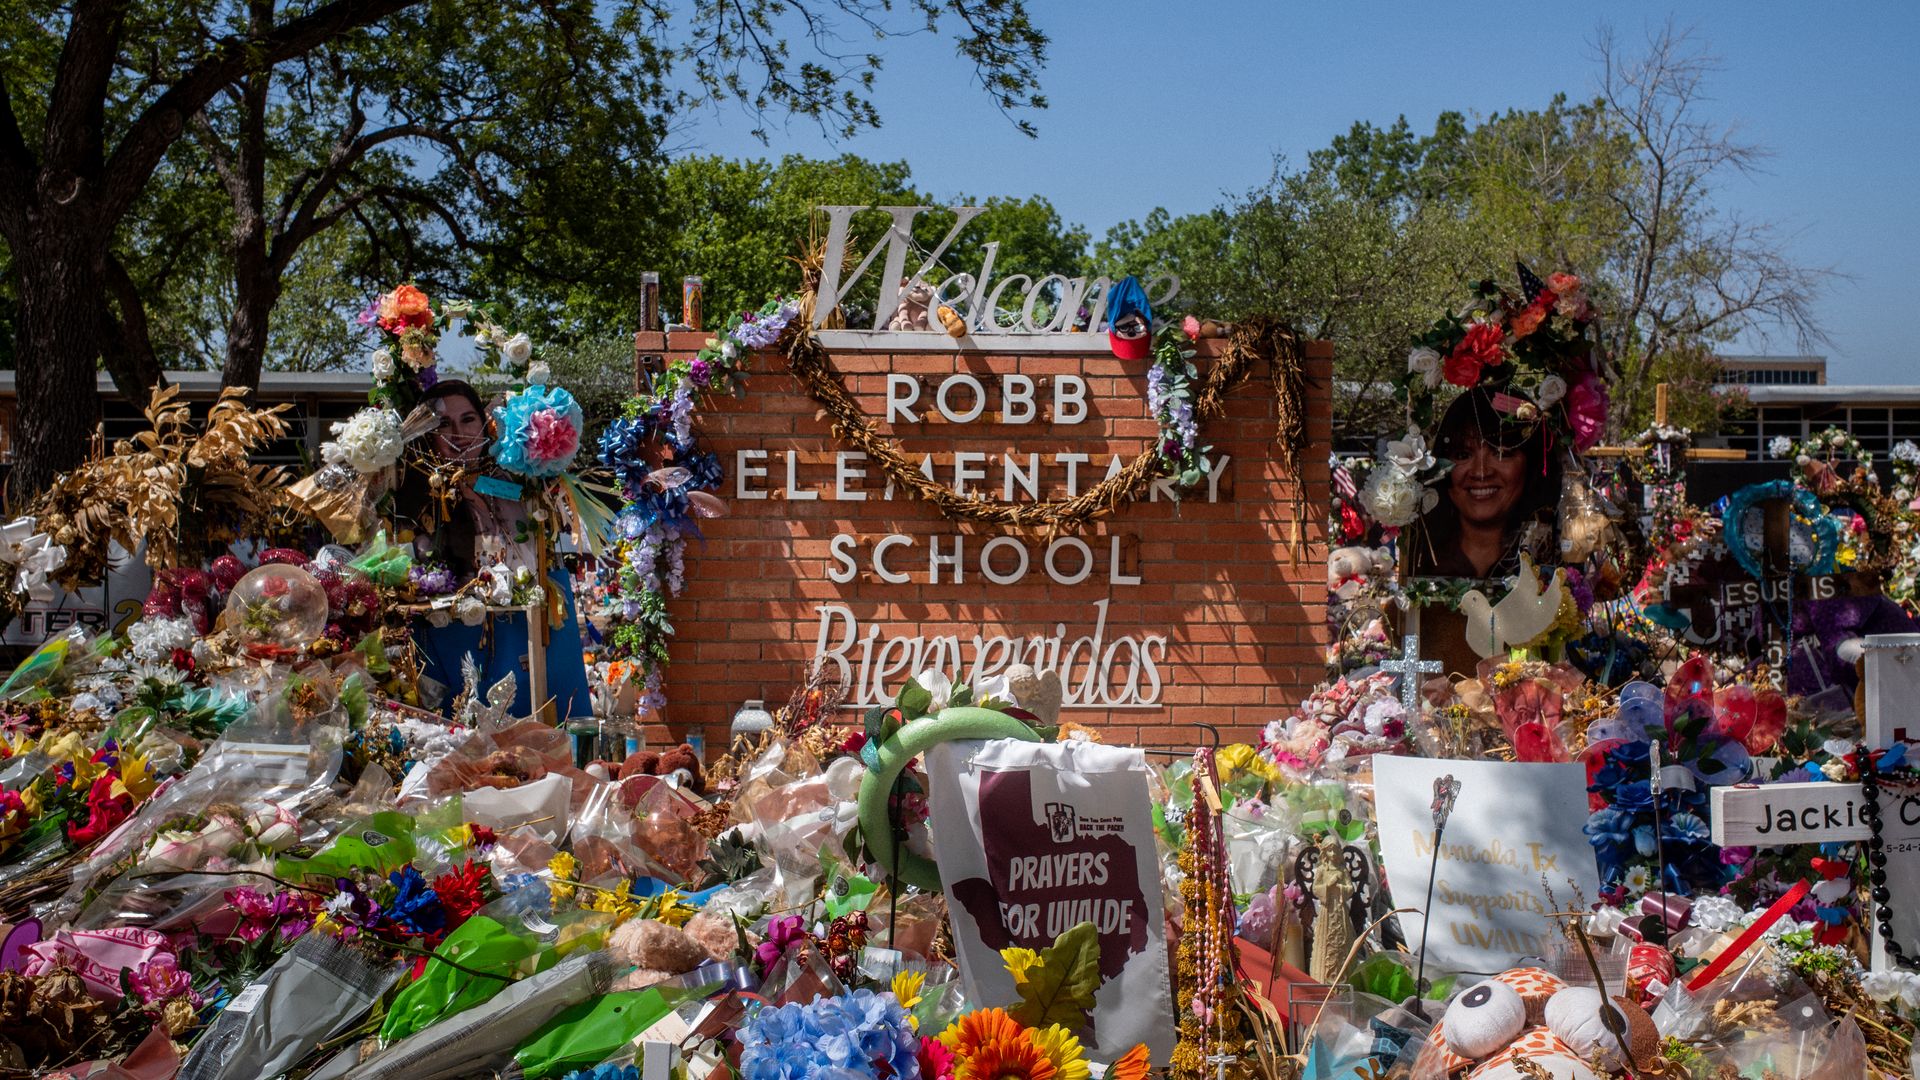 The outside sign for Robb Elementary School in Uvalde, TExas, is surrounded by flowers, balloons and signs in support of the shooting victims